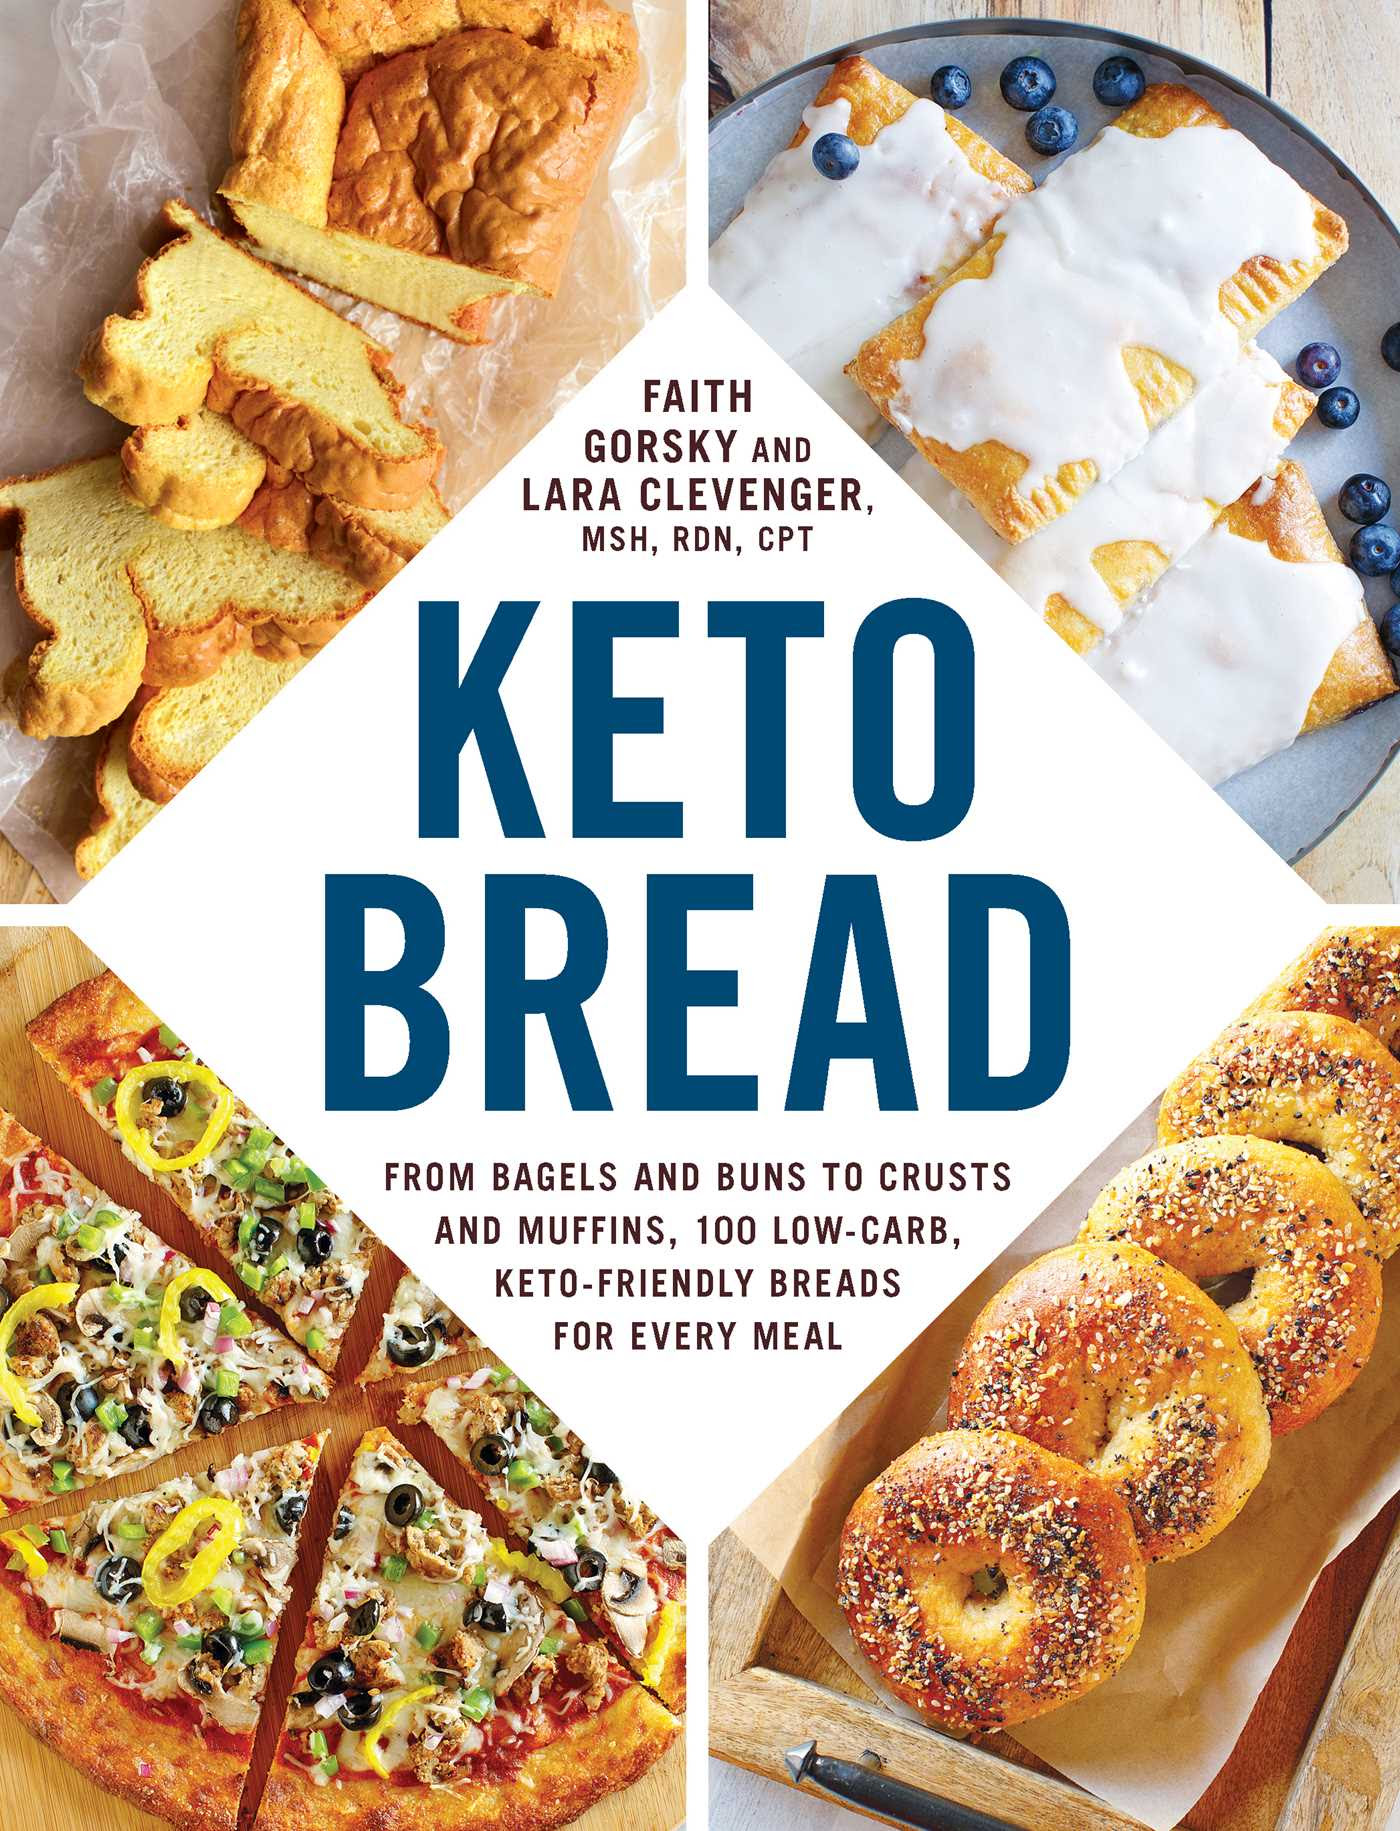 Keto Bread: From Bagels and Buns to Crusts and Muffins, 100 Low-Carb, Keto-Friendly Breads for Every Meal PDF